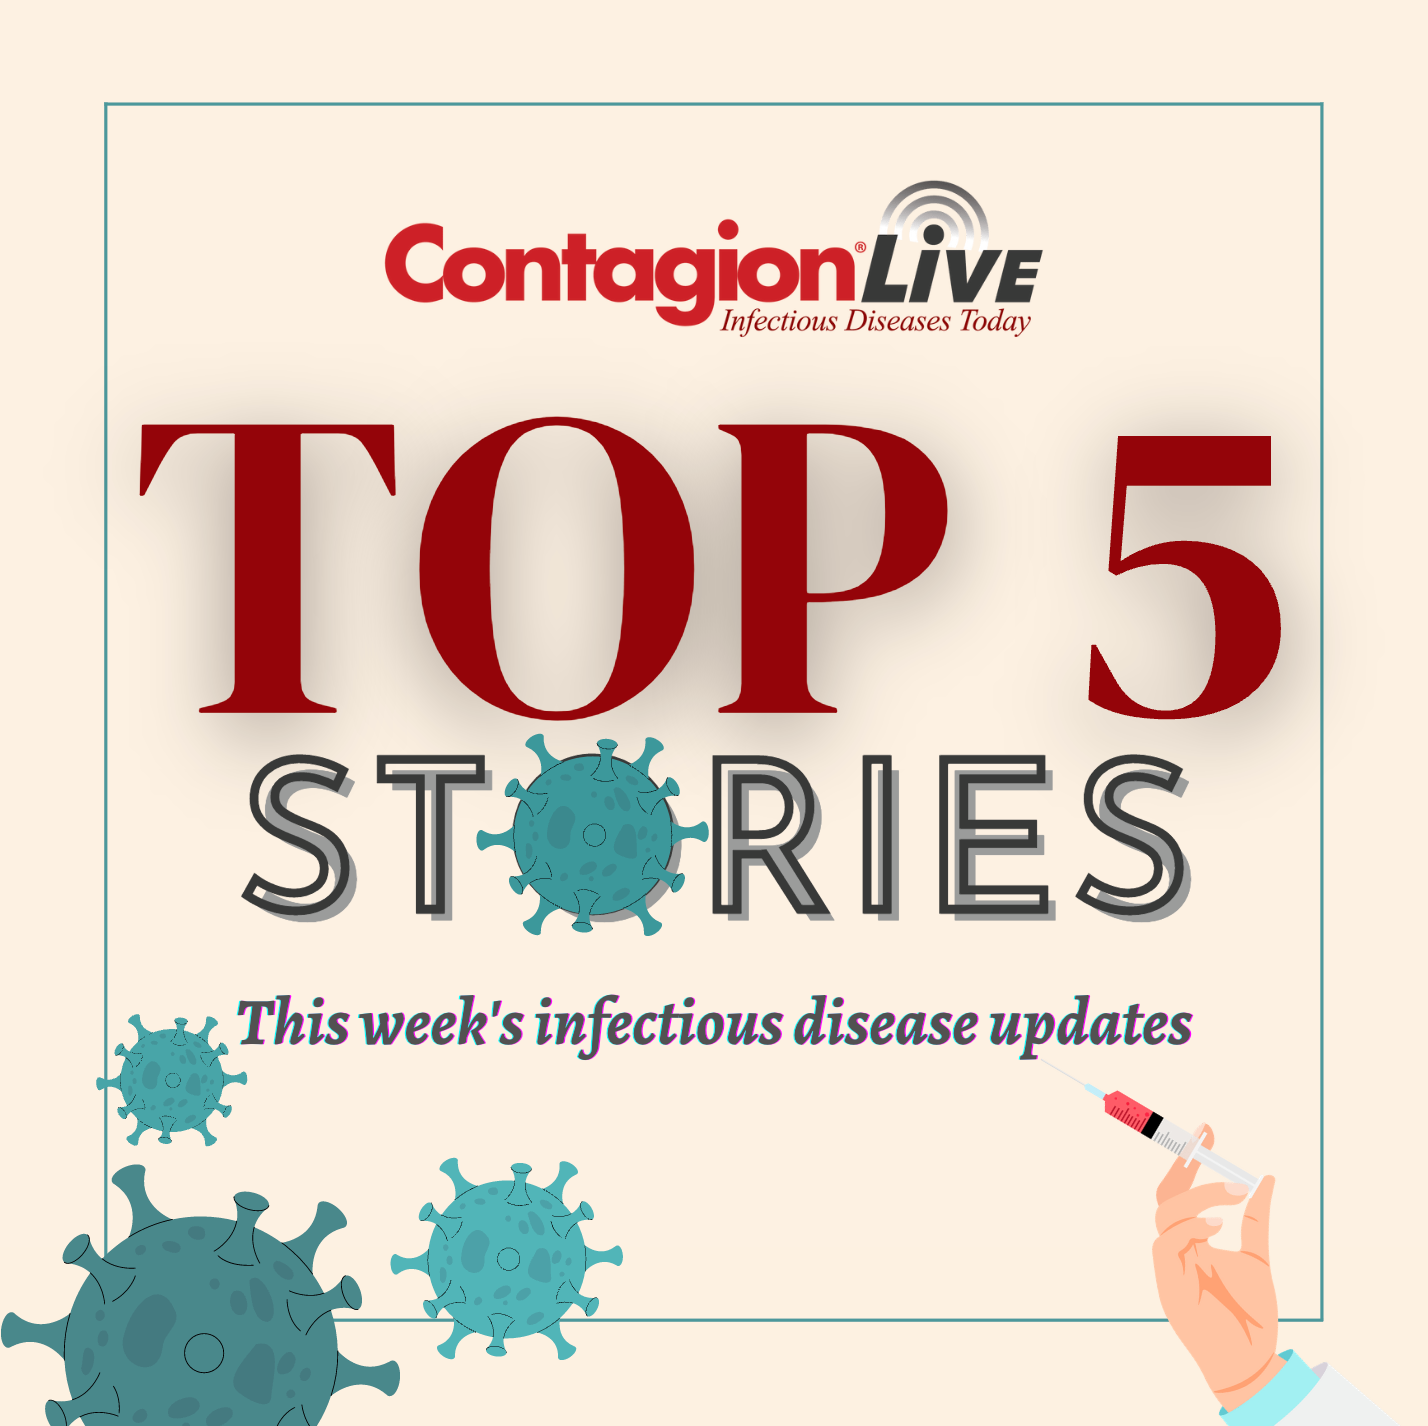 Weekly Roundup: The 5 Most Impactful Infectious Disease Stories You Need to Know